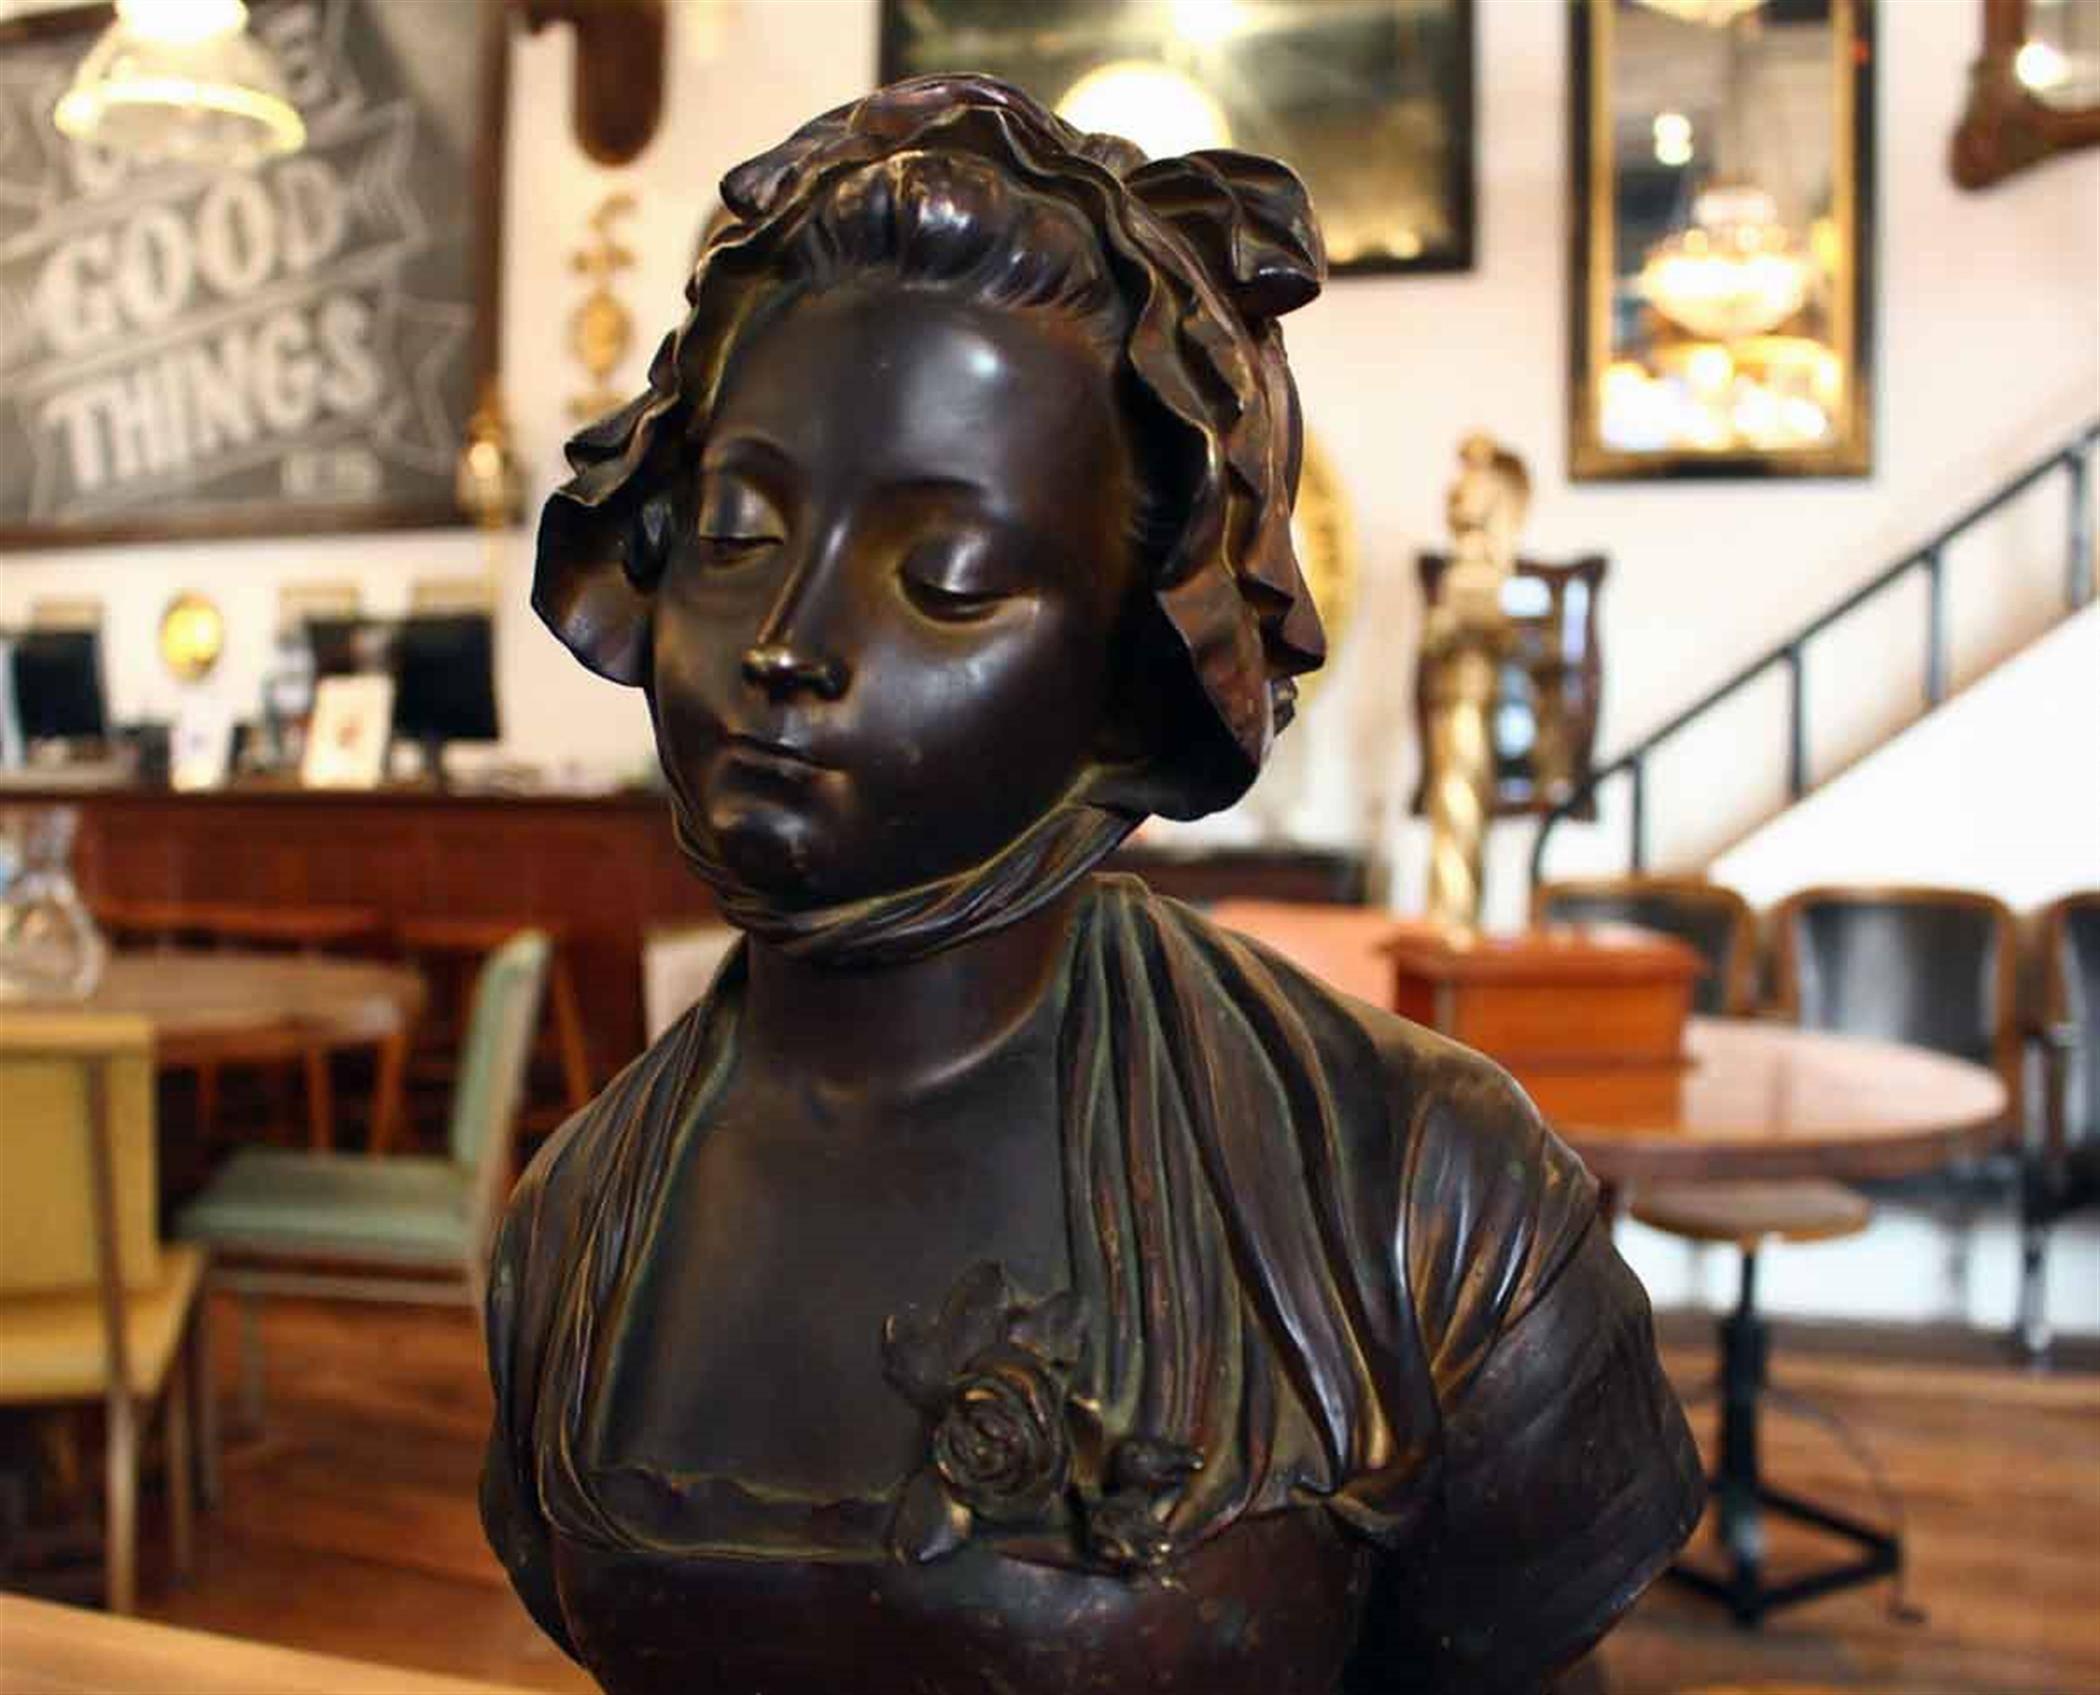 Bronze bust of woman with bonnet. Signed E. Laurent. French Romantic sculptor born 1832 died 1898. Please note, this item is located in one of our NYC locations.